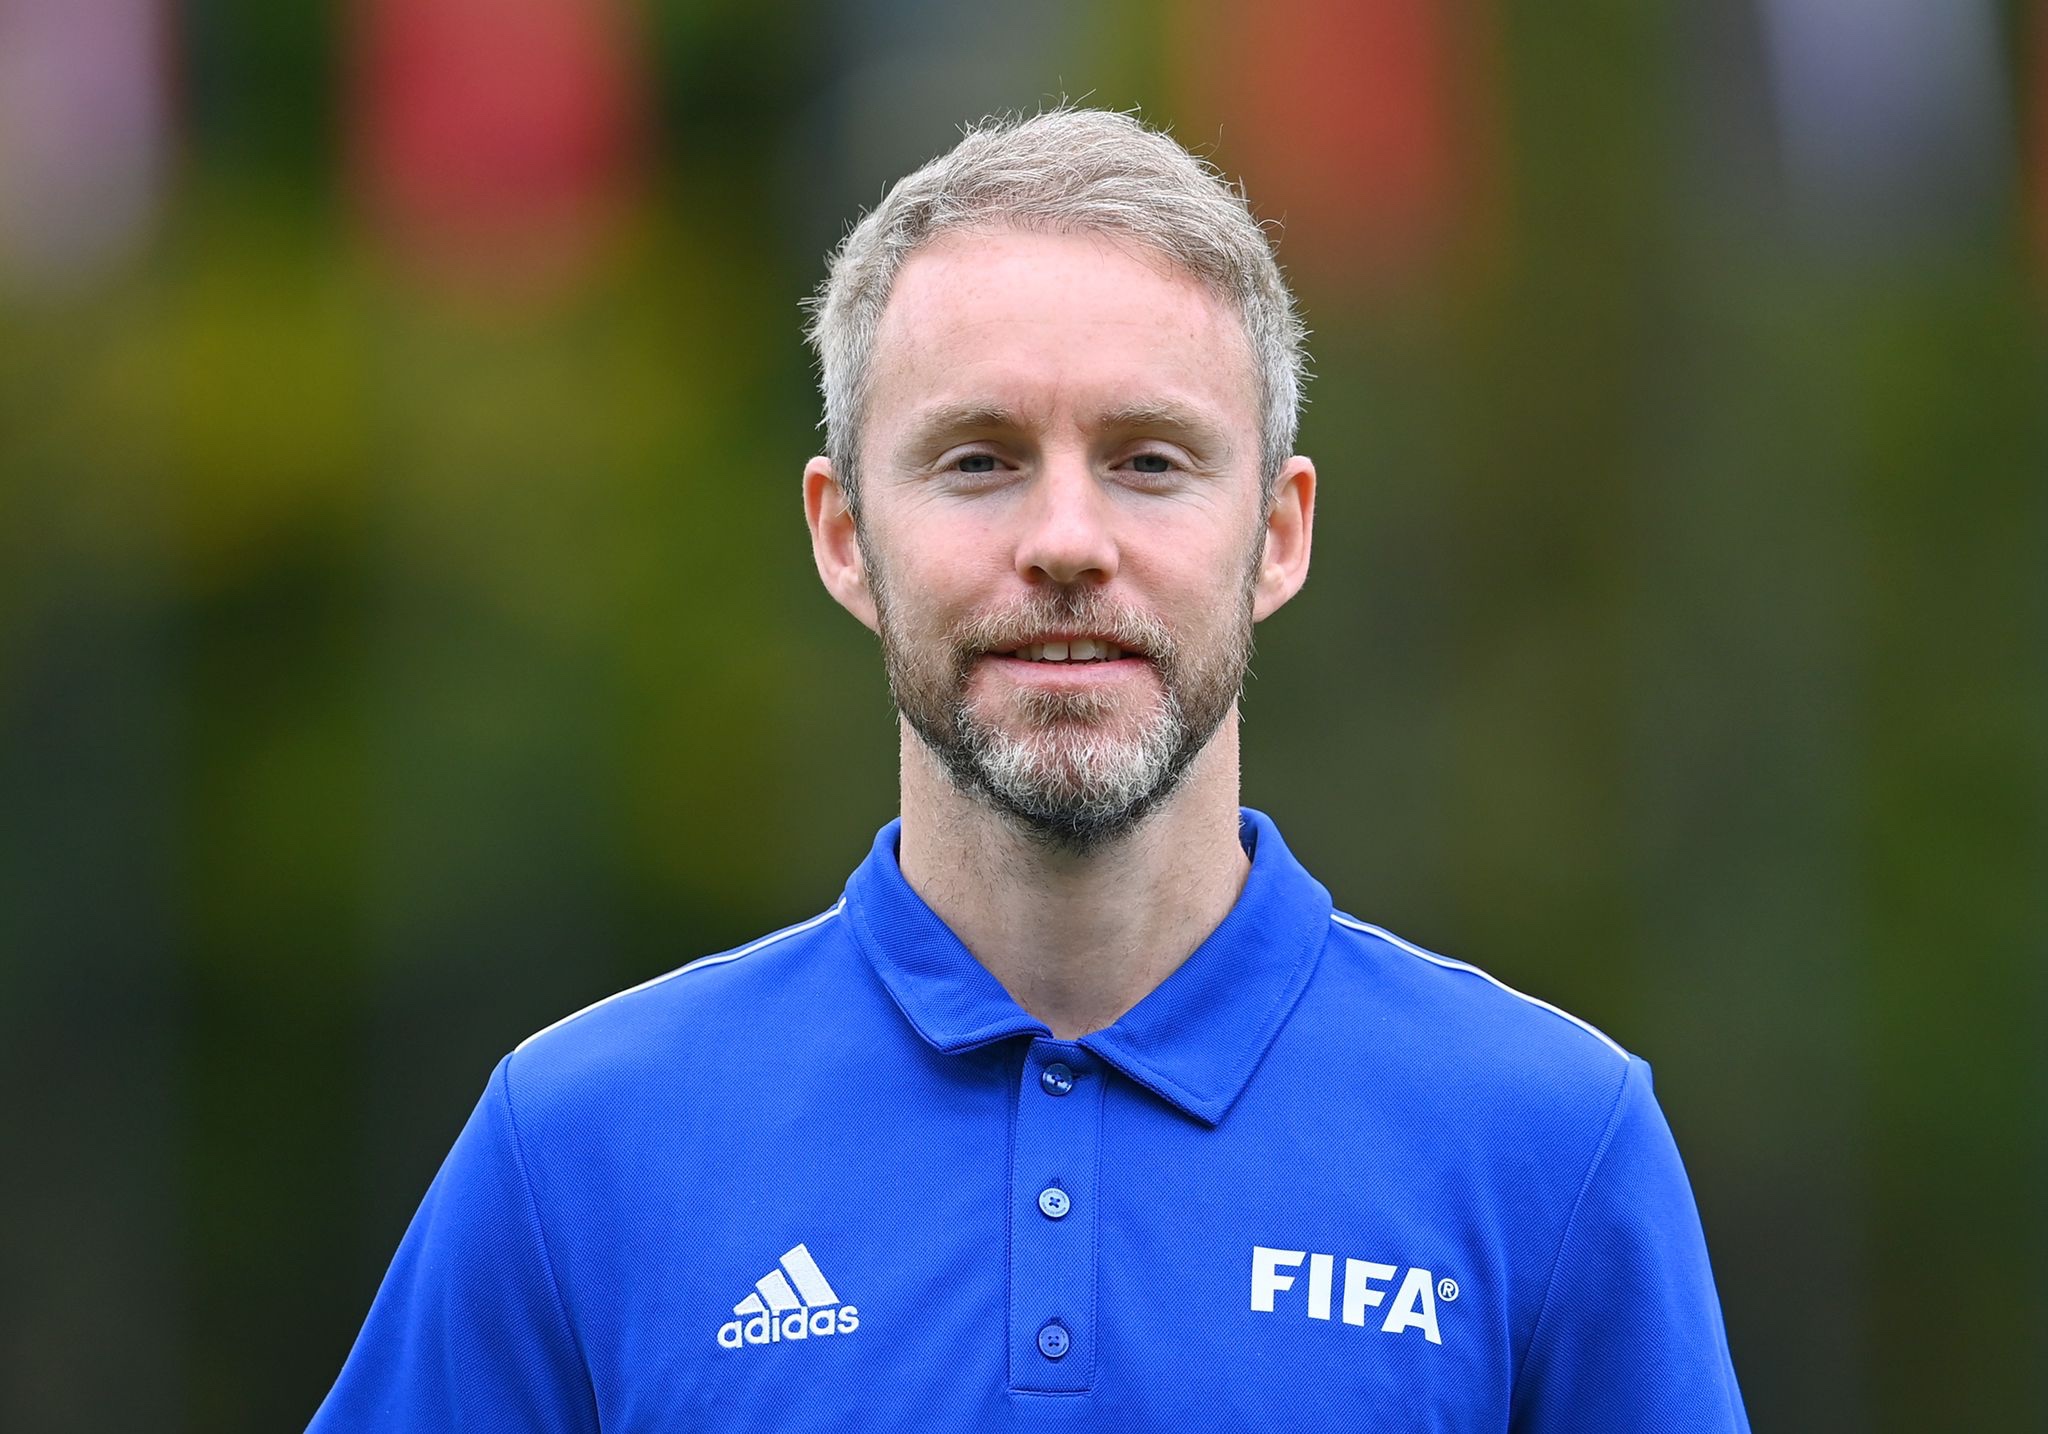 Eddie Munnelly takes up role at FIFA